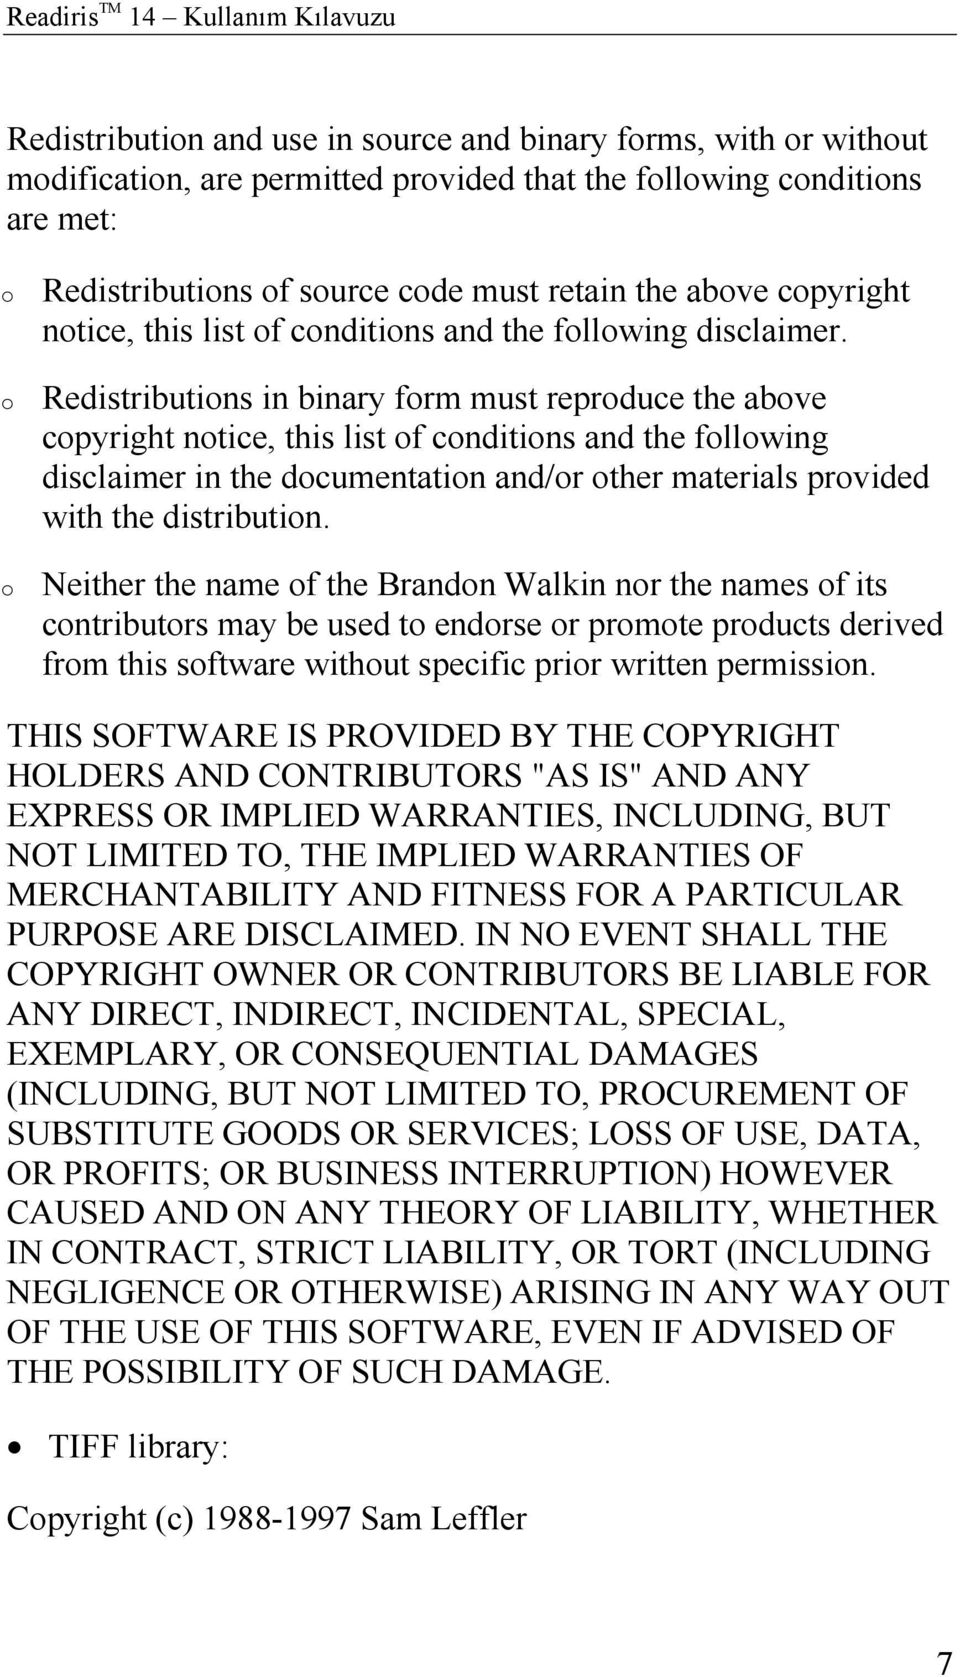 Redistributions in binary form must reproduce the above copyright notice, this list of conditions and the following disclaimer in the documentation and/or other materials provided with the